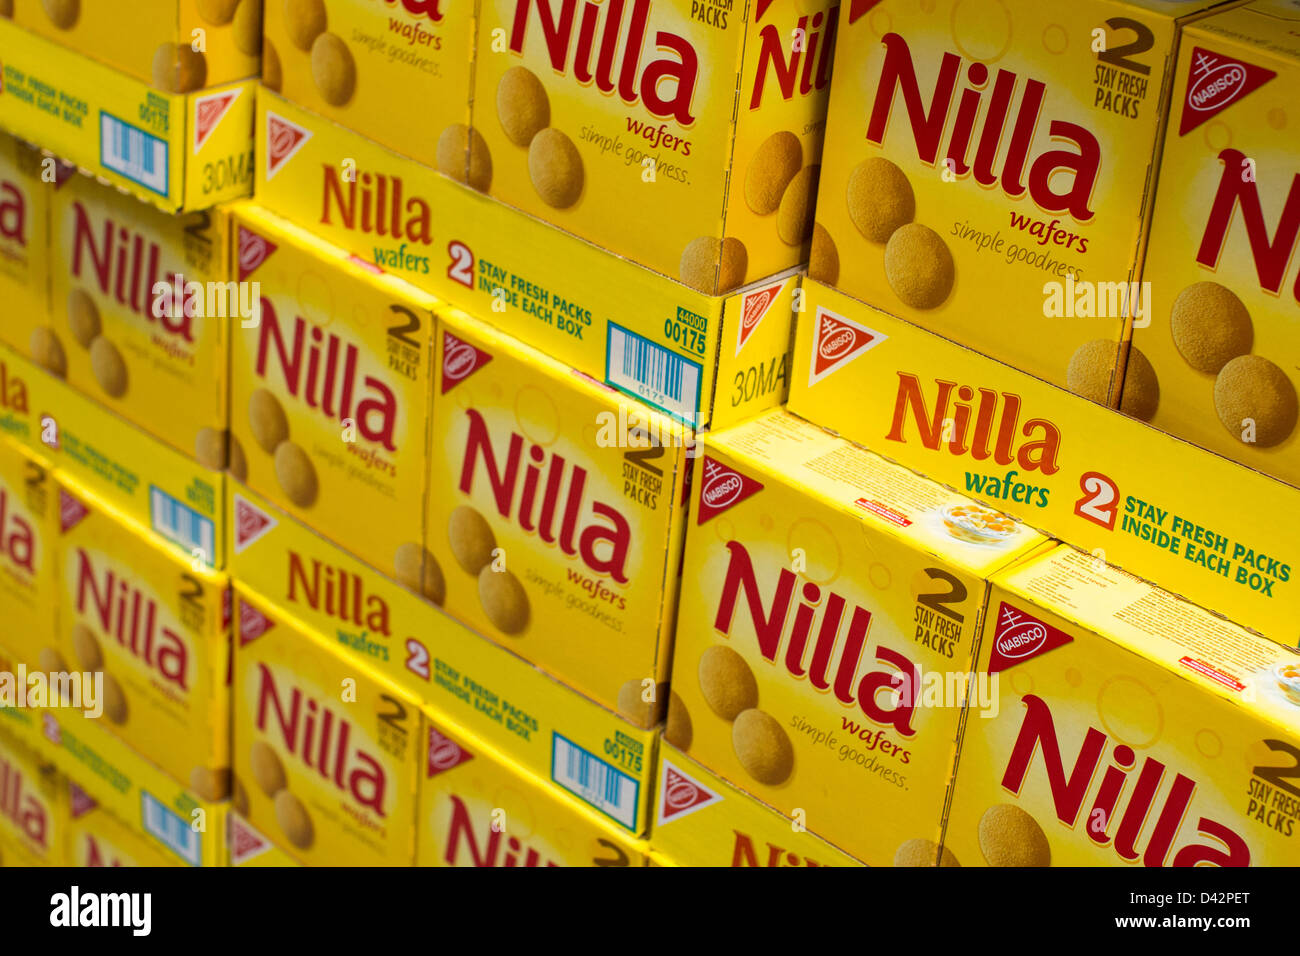 Nilla wafers on display at a Costco Wholesale Warehouse Club. Stock Photo